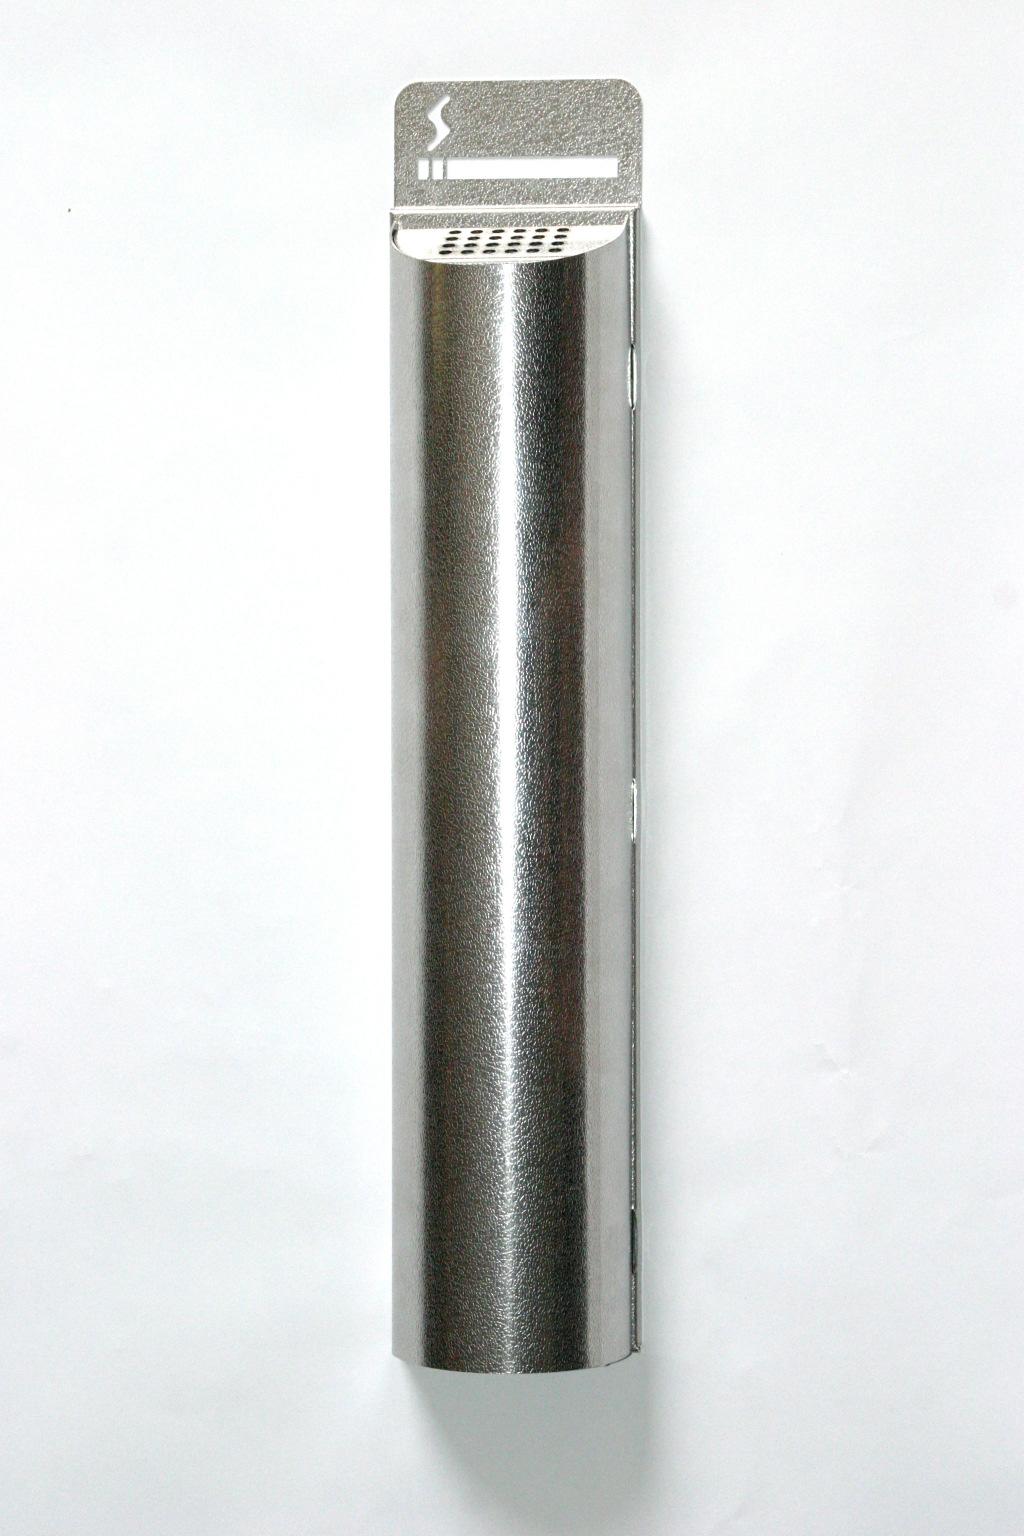 CYLINDRICAL SATIN STAINLESS STEEL ASHTRAY - Designer Ashtray for Wall Mounting.